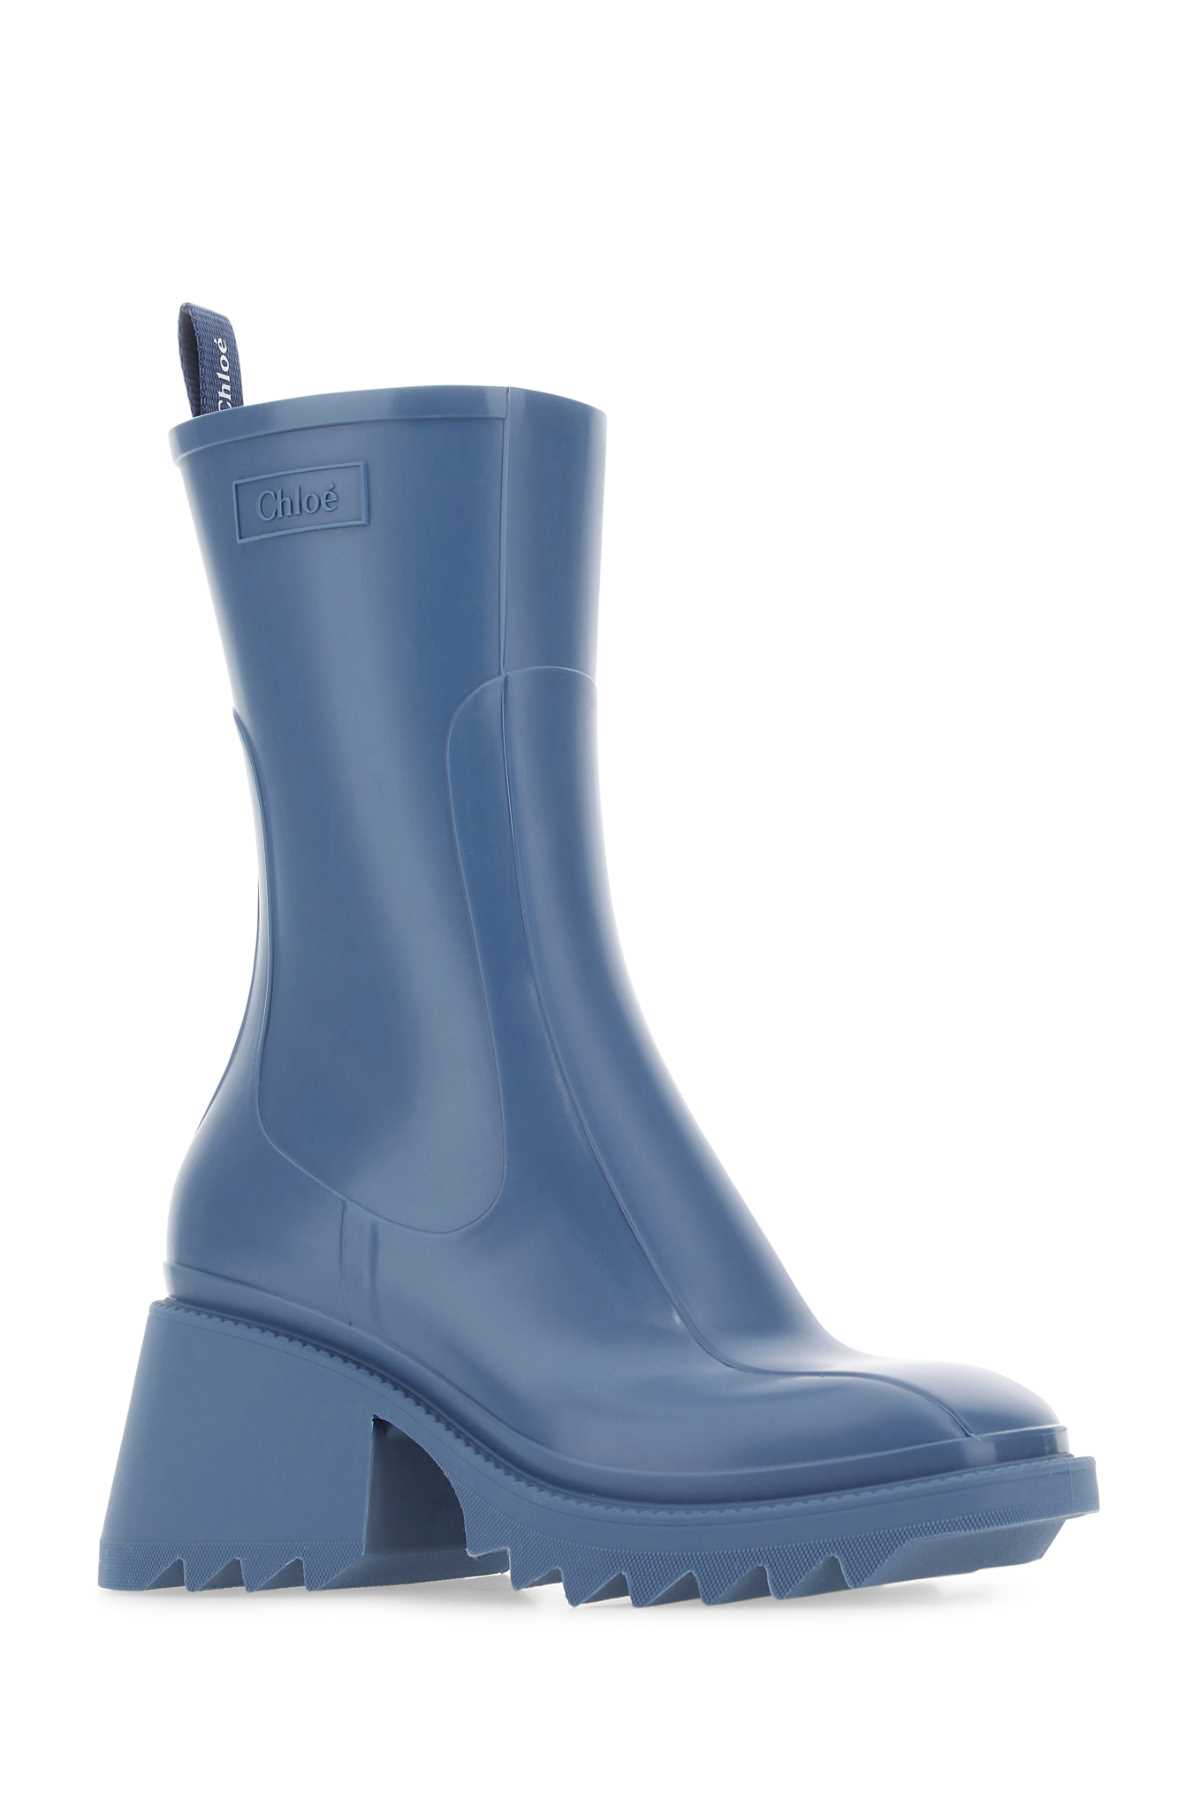 CHLOÉ AIR FORCE BLUE RUBBER BETTY ANKLE BOOTS